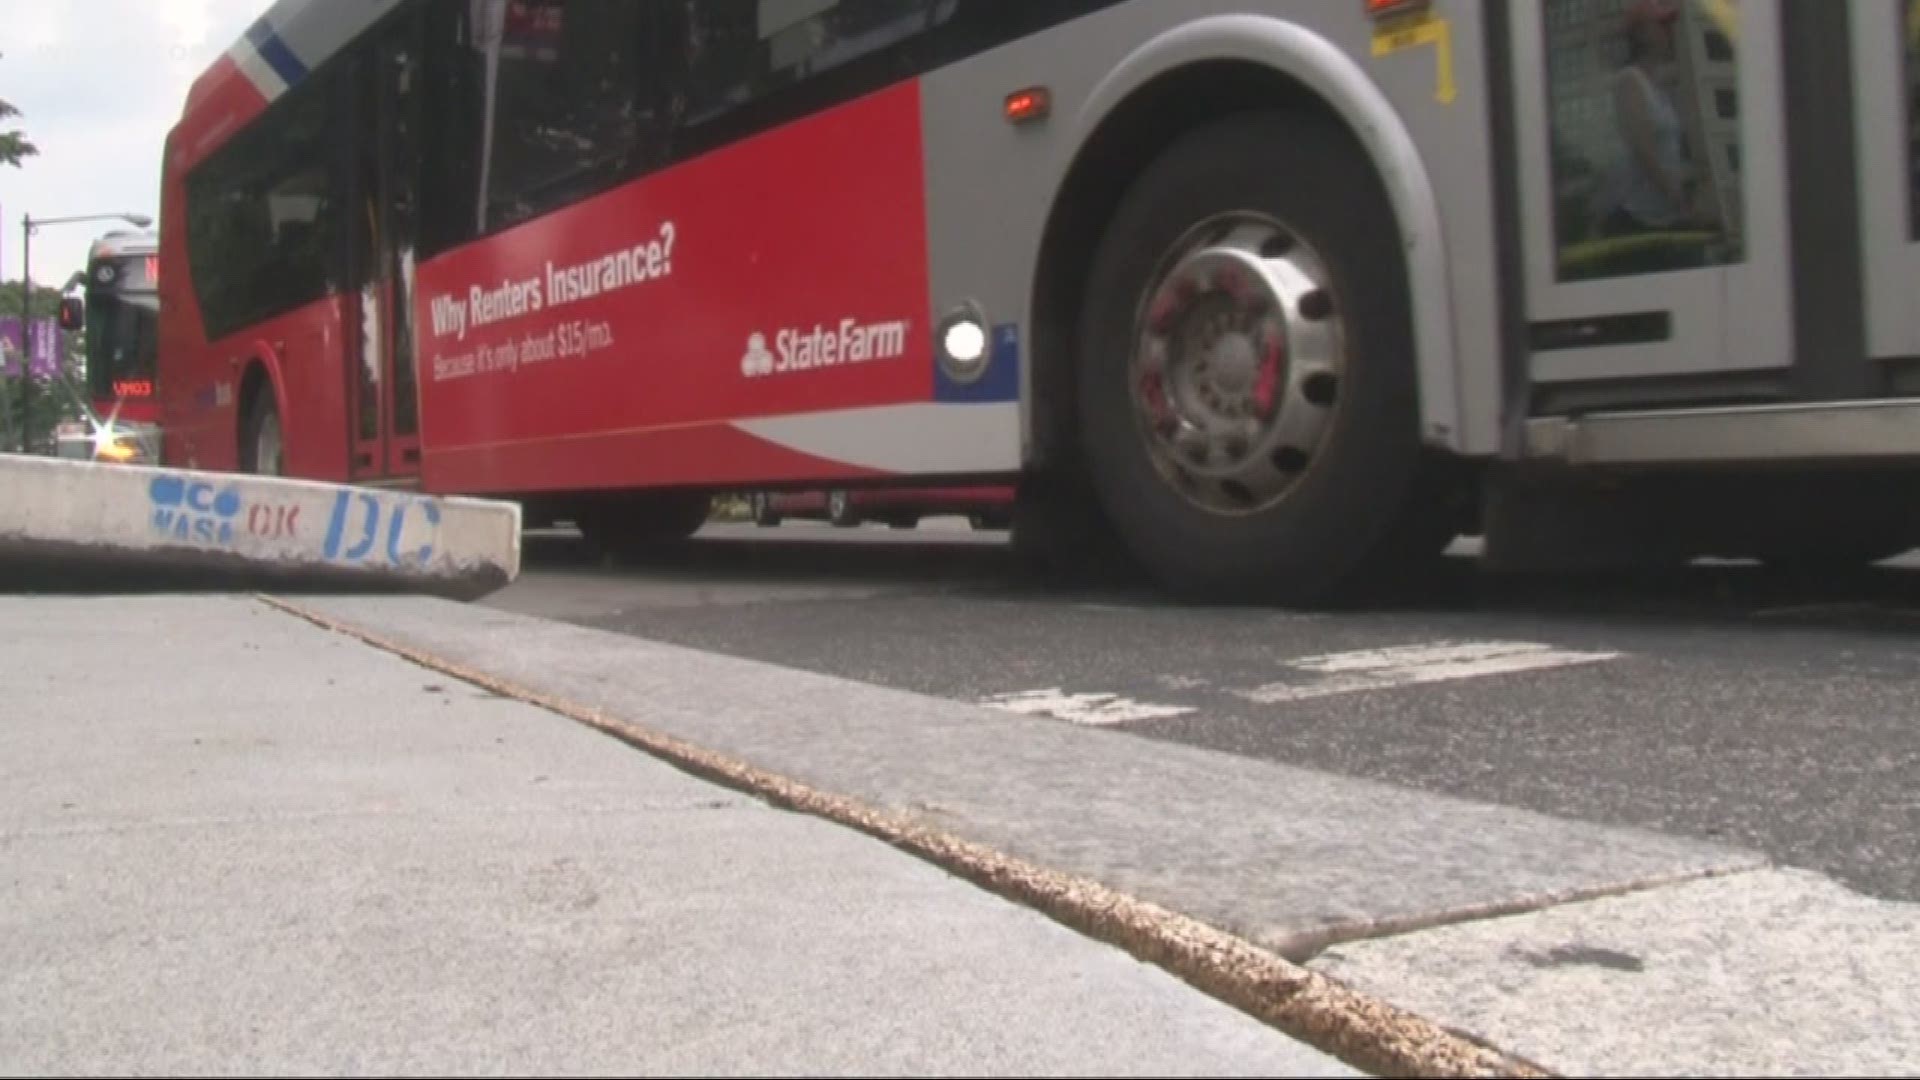 While it’s a lifeline for some, buses are bypassed by a majority of commuters in our region. A recent study found that 62 percent take their cars every day, causing crippling traffic. 

Now, there’s a new push to get more people on the bus than ever thanks to a plan for sweeping changes in D.C., Maryland, and Virginia.